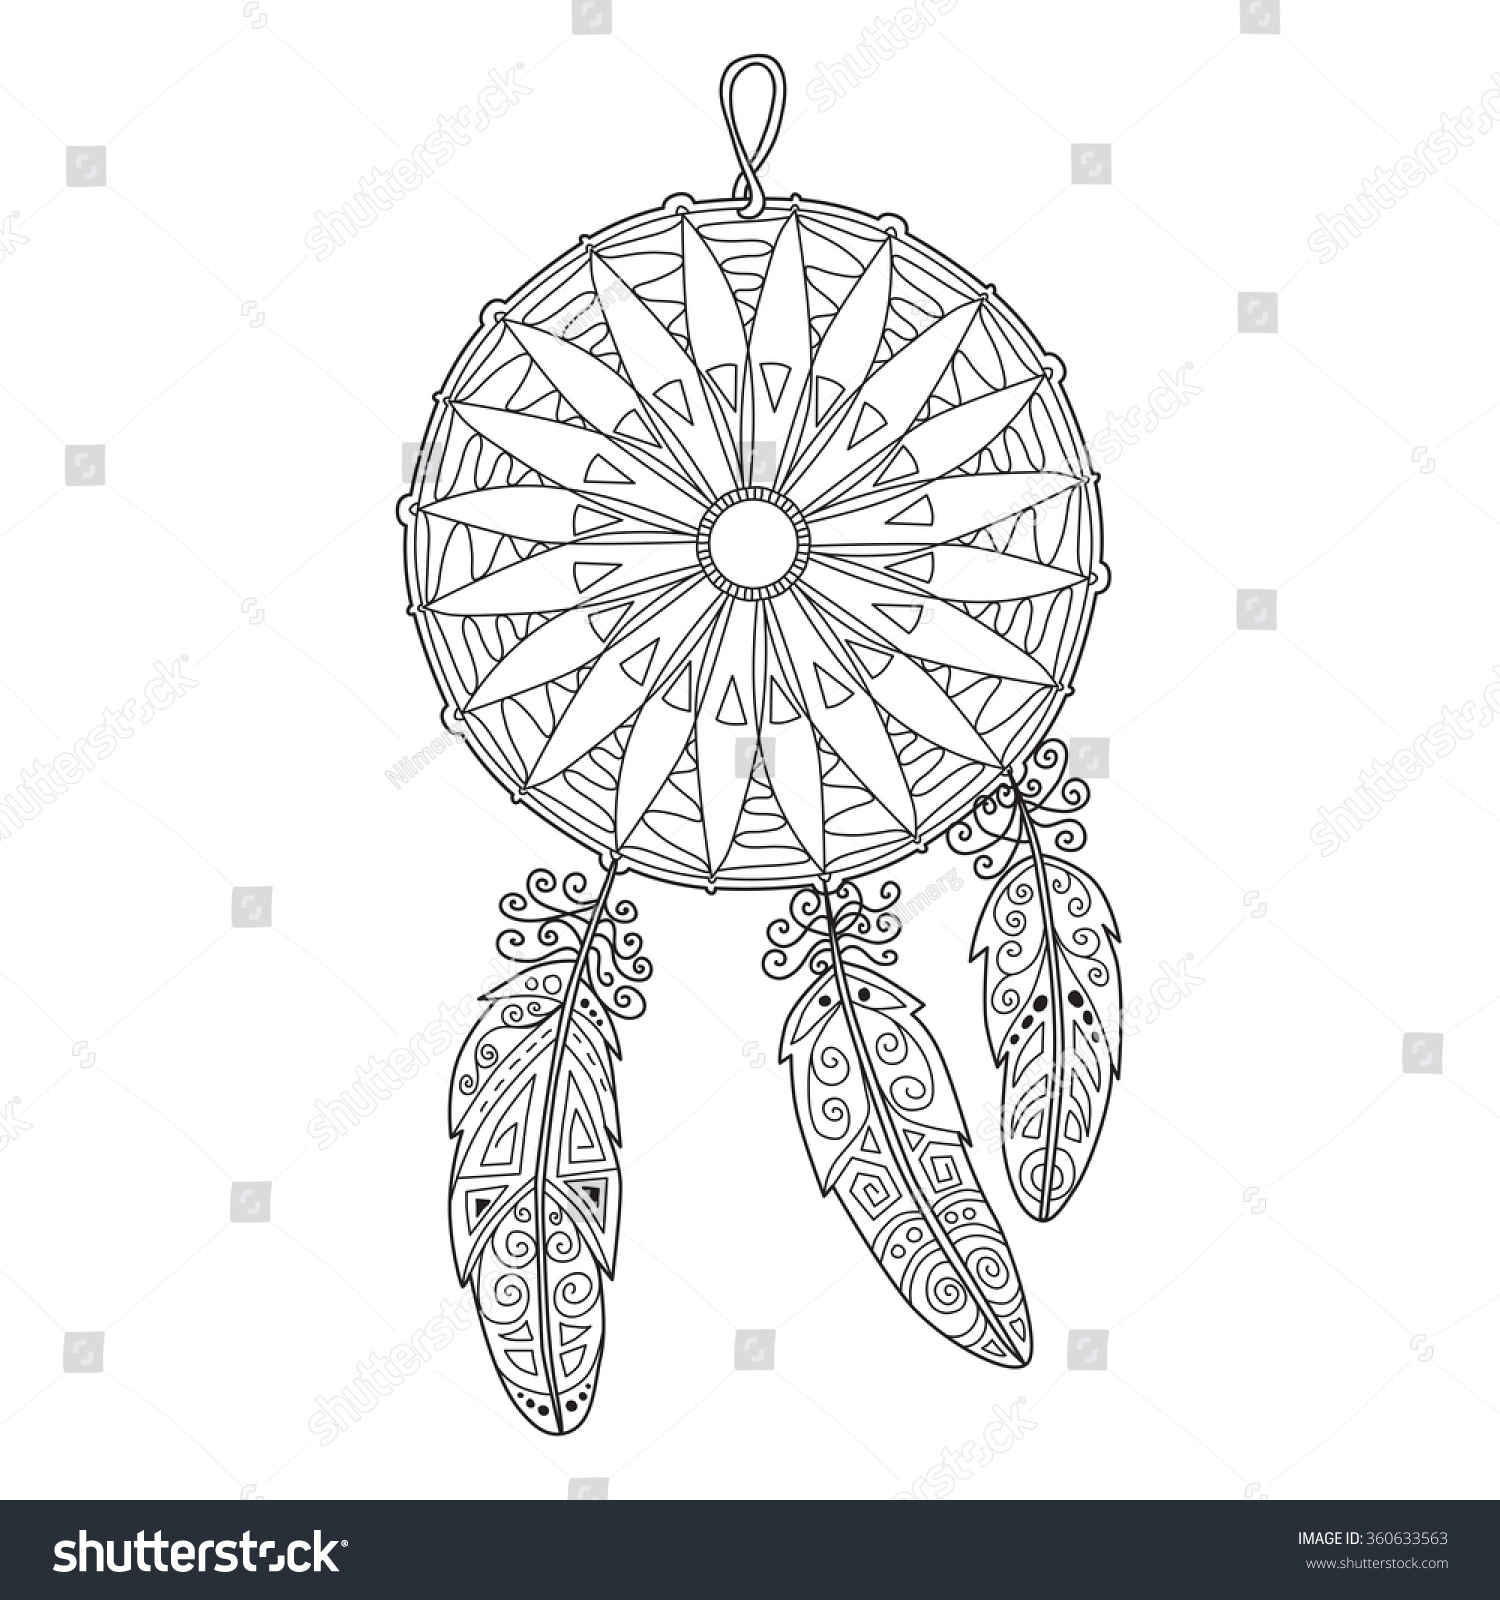 Zentangle dream catcher with feathers for adult anti stress Coloring Page for art therapy illustration